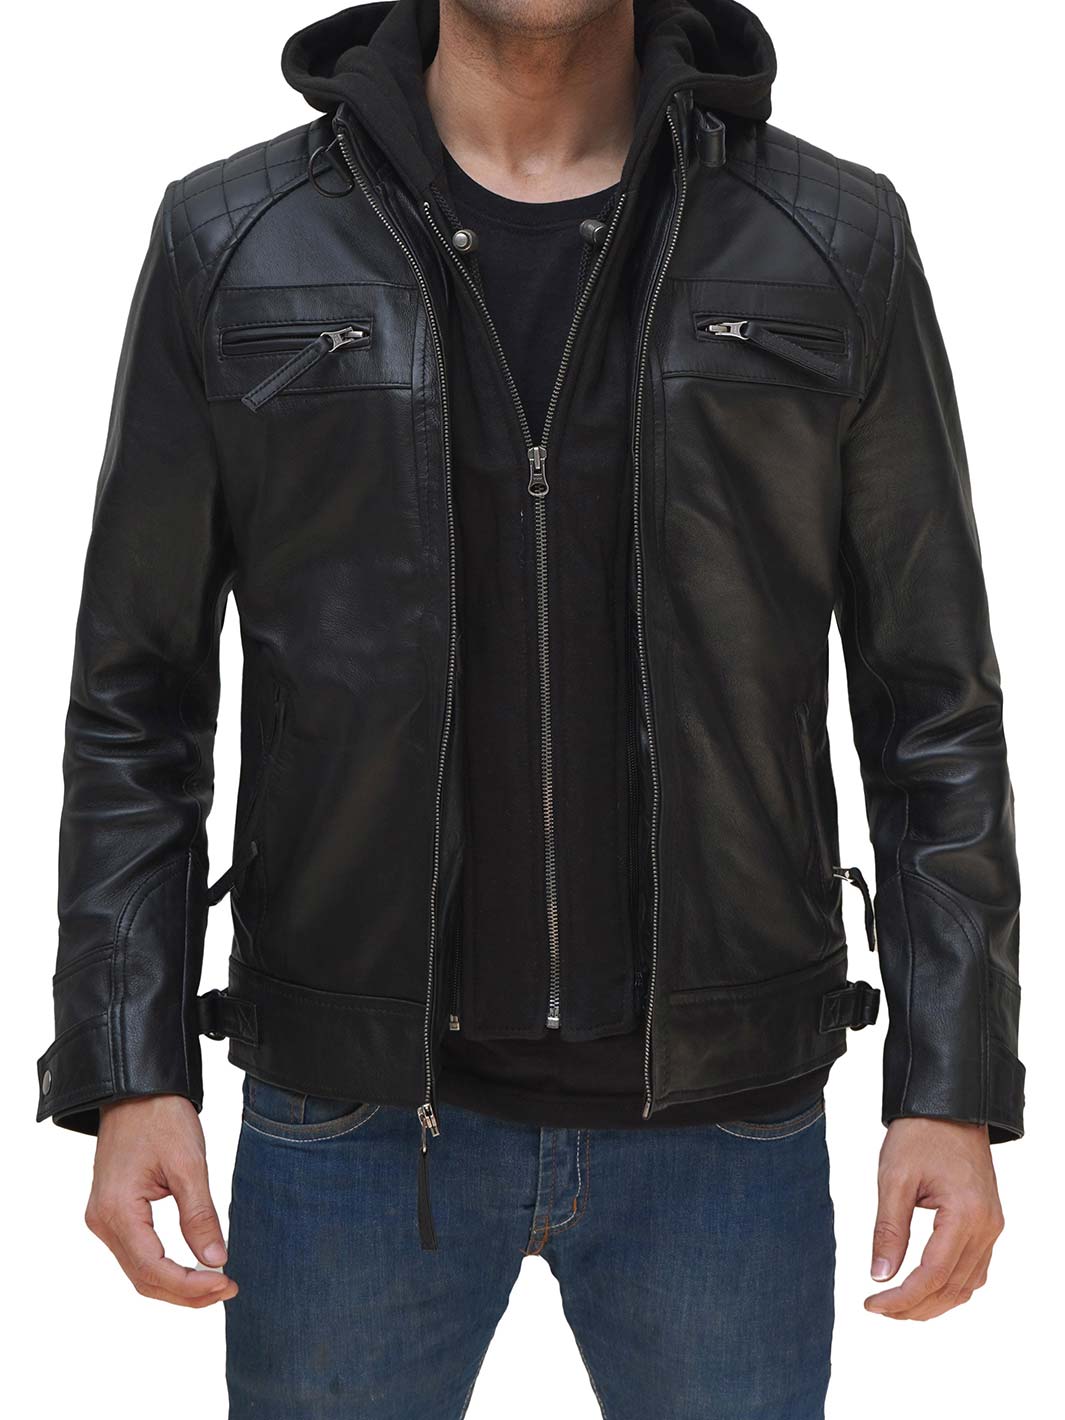 Mens Black Leather Jacket with Removable Hood